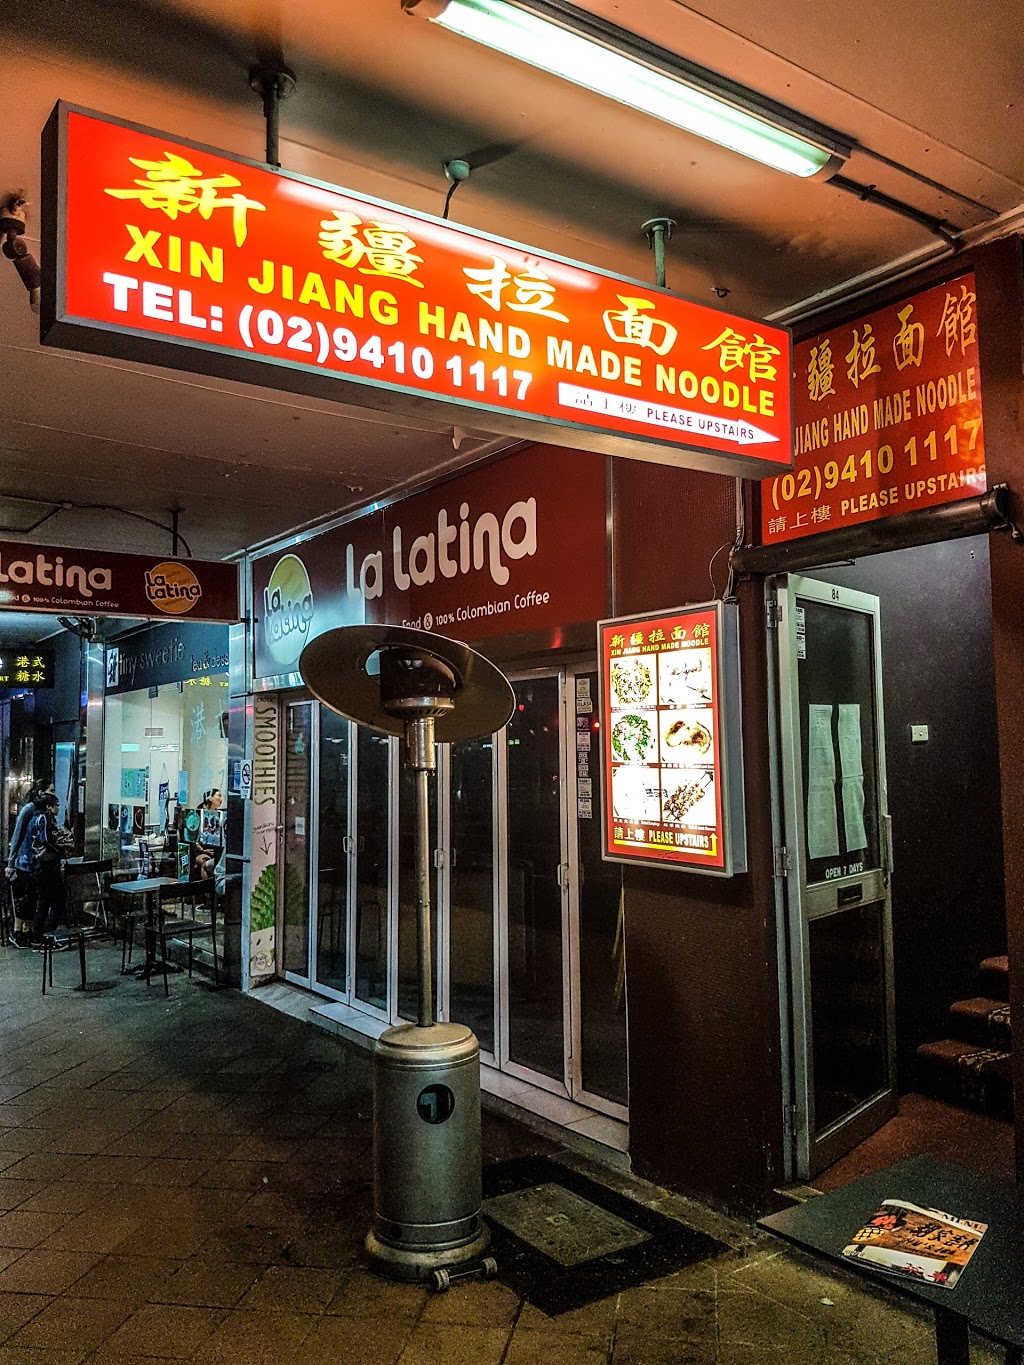 Xin Jiang Hand Made Noodle | restaurant | 1/84 Archer St, Chatswood NSW 2067, Australia | 0294101117 OR +61 2 9410 1117